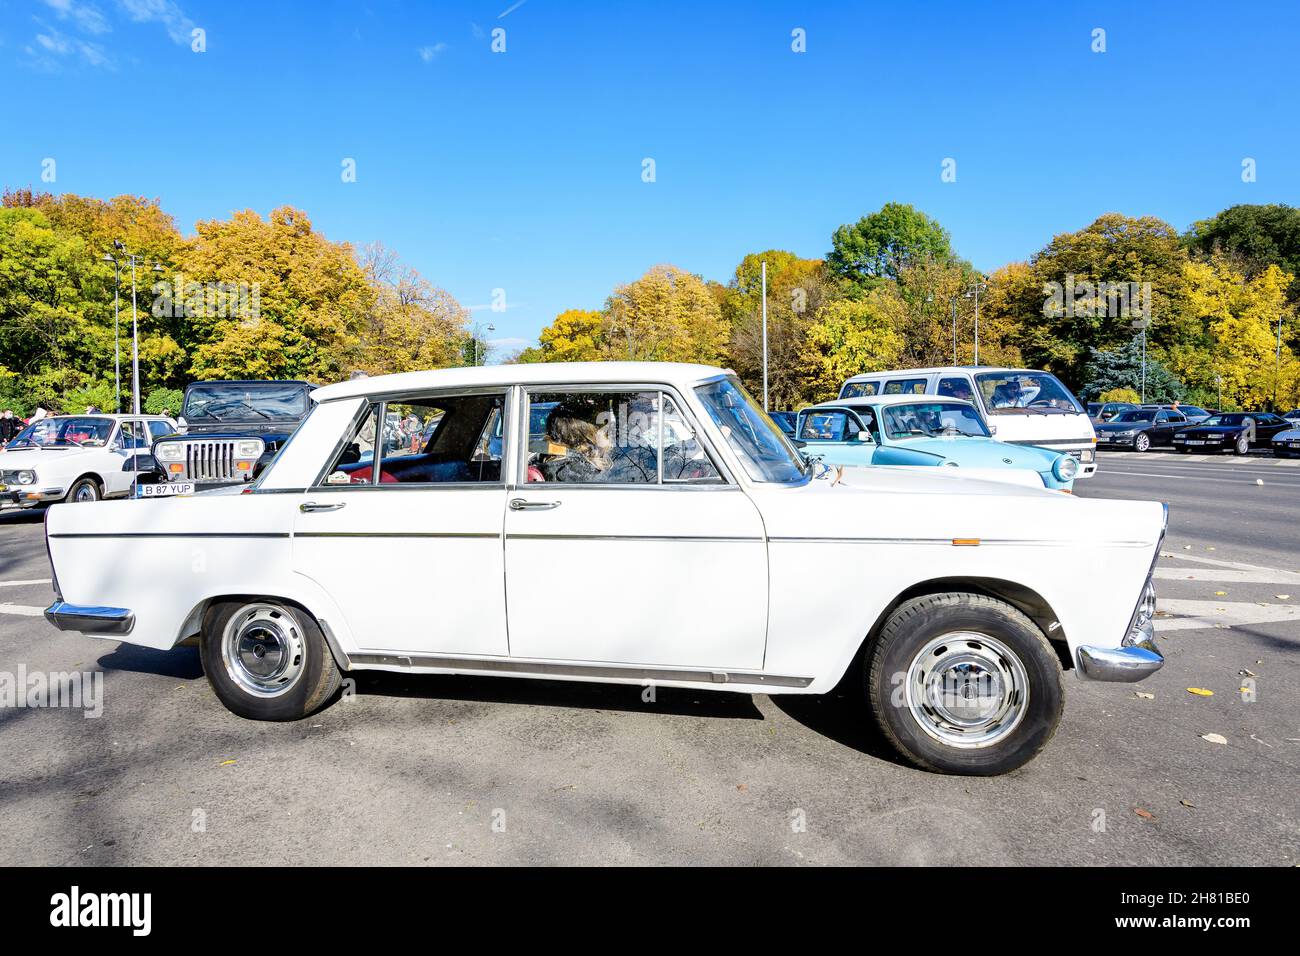 Bucharest, Romania, 24 October 2021: One white Lada vintage car in traffic in a street at an event for vintage cars collections, in a sunny autumn day Stock Photo